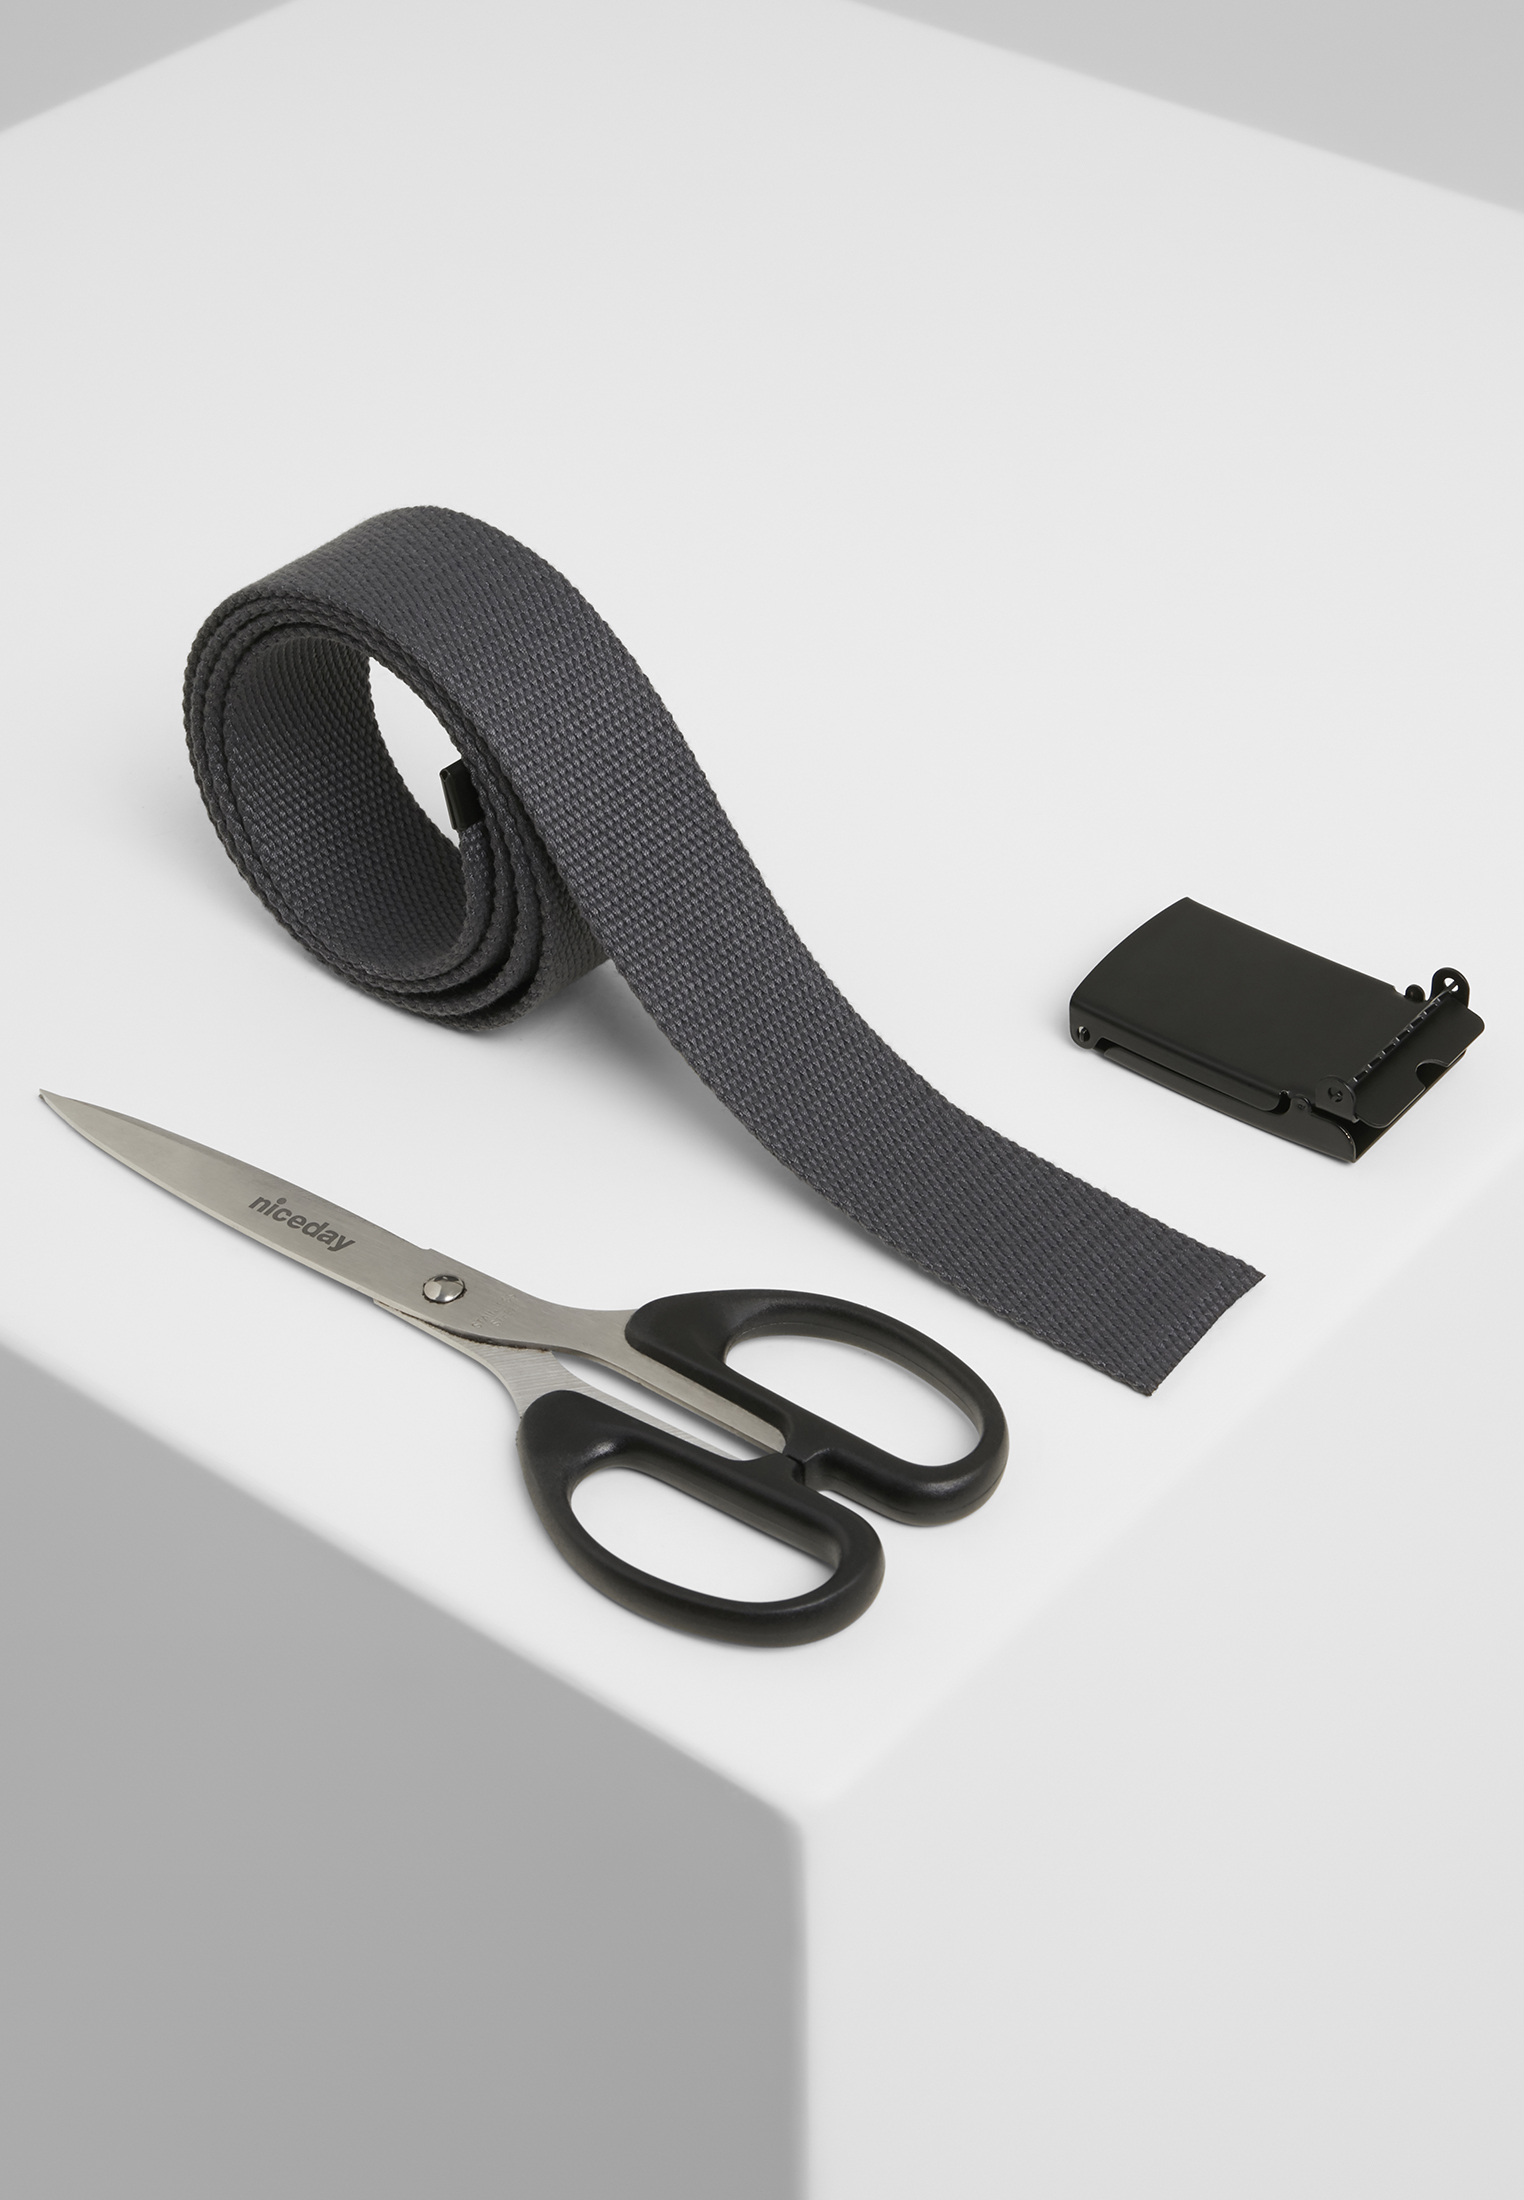 G?rtel Canvas Belts in Farbe charcoal/black